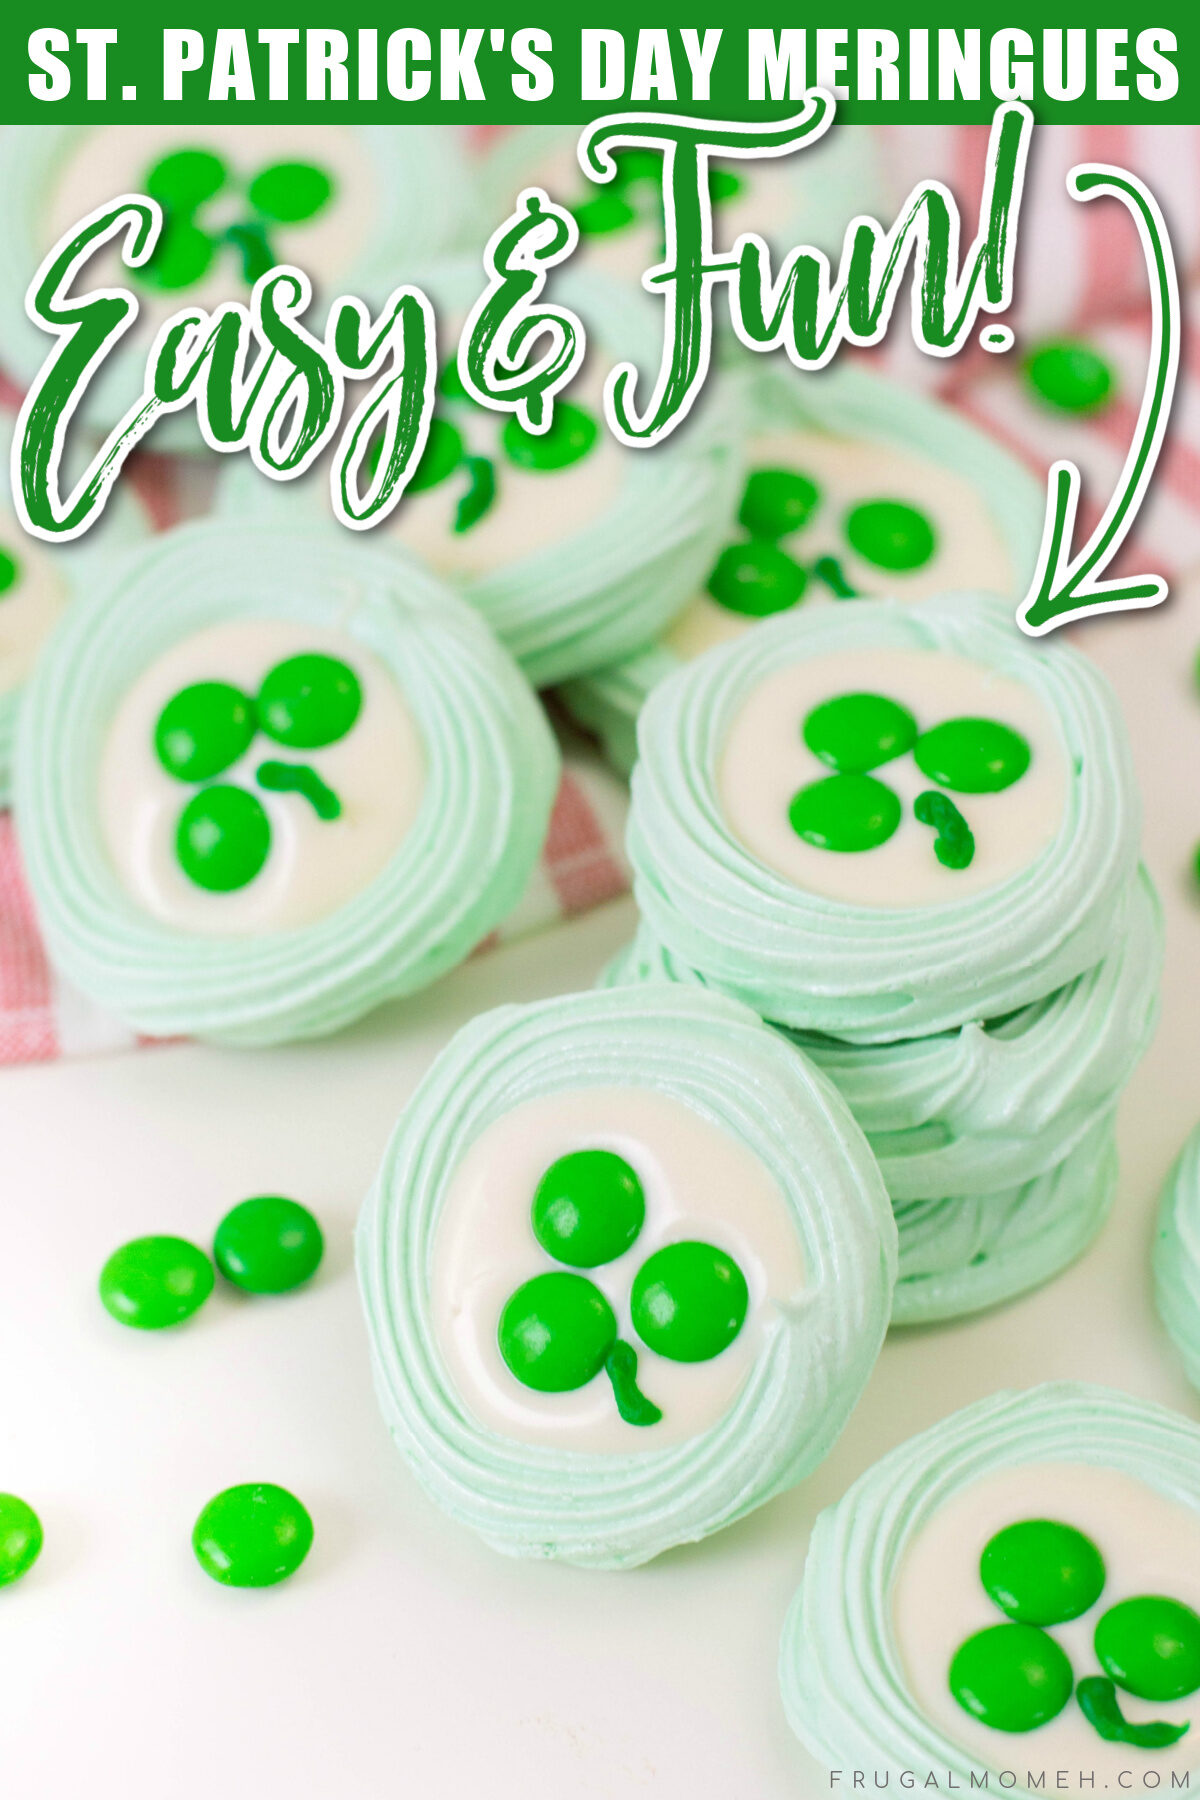 These festive and fun St. Patrick's Day Meringue Cookies are easy to make, and the perfect way to add some Irish cheer to your celebration!